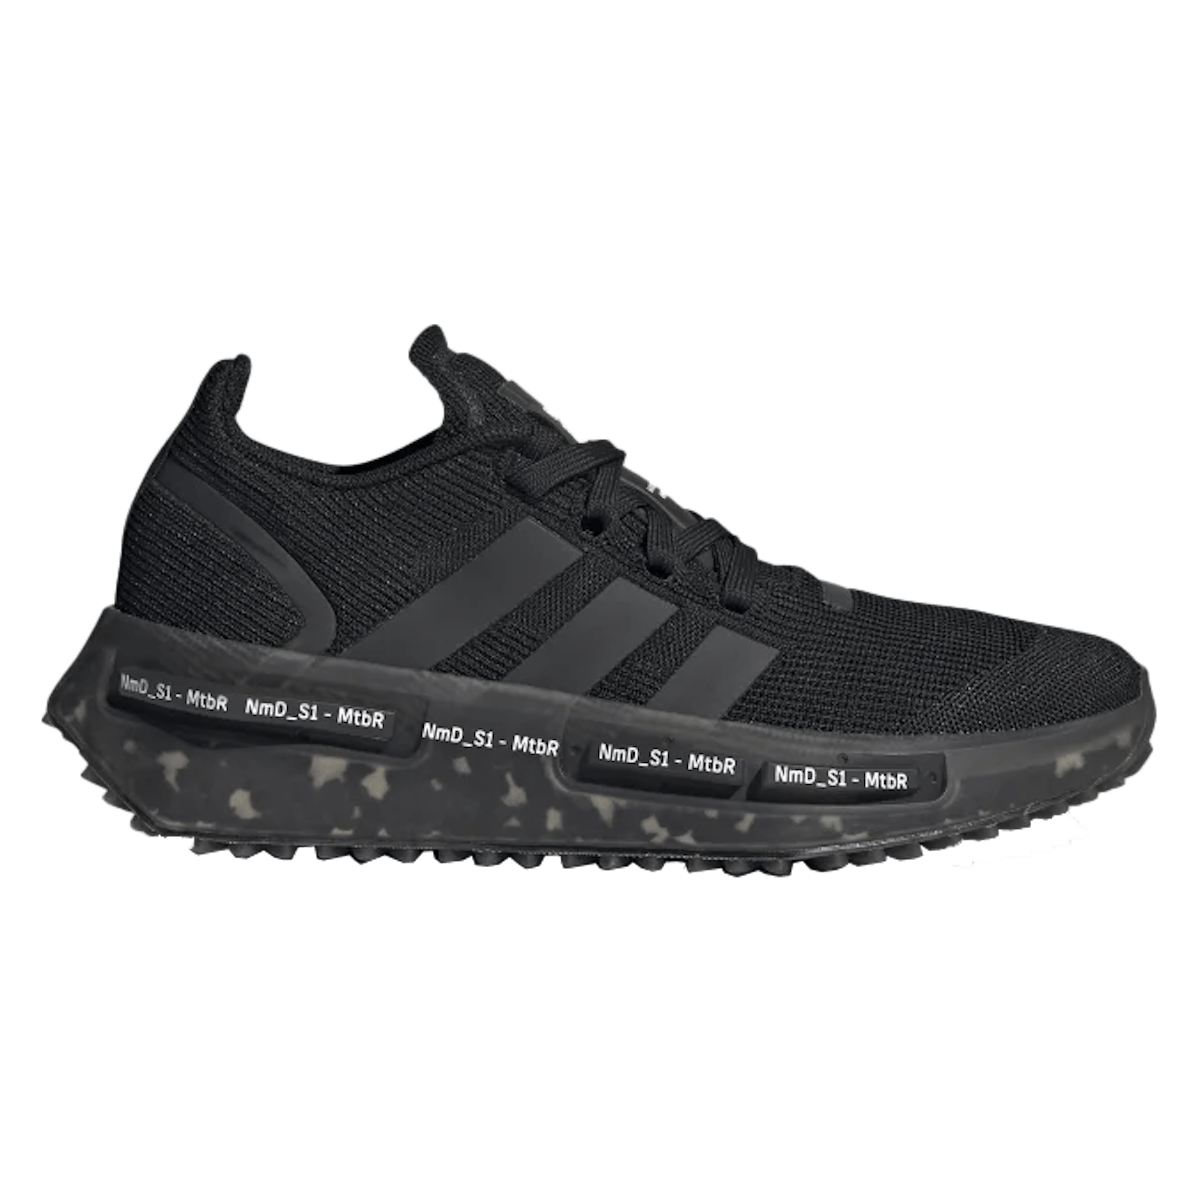 Adidas NMD_S1 Made To Be Remade "Core Black"